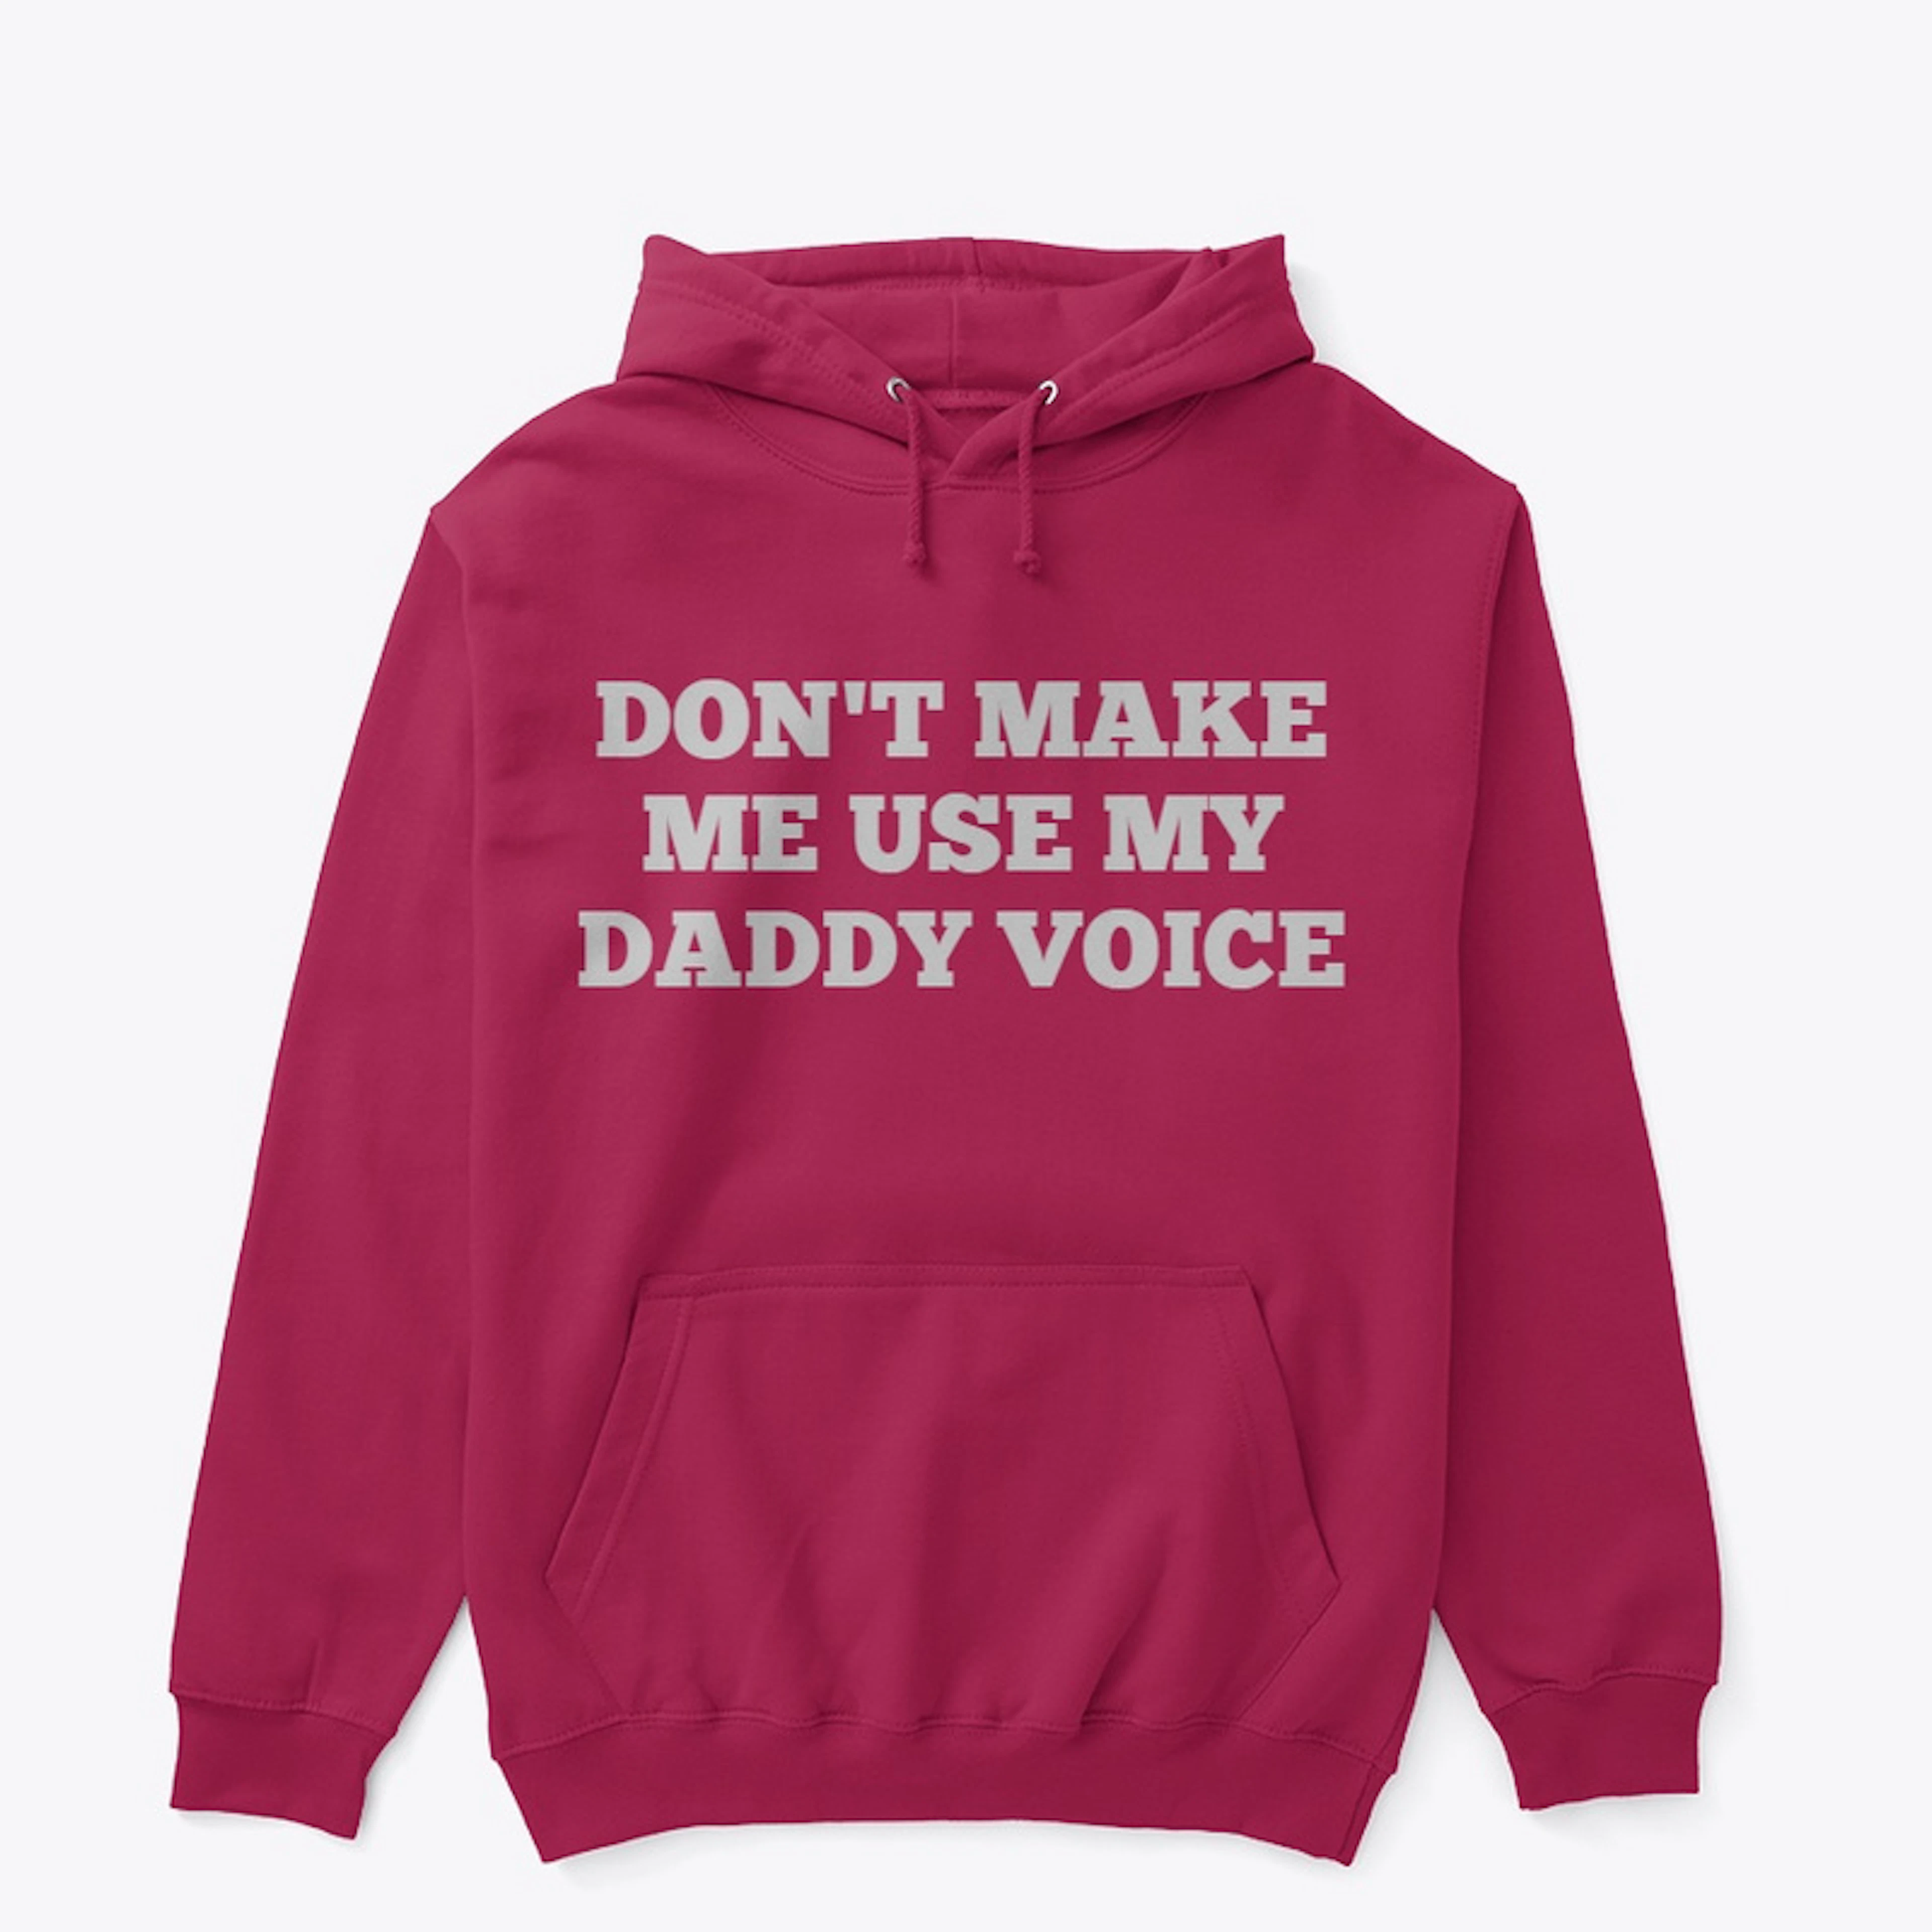 DADDY'S VOICE